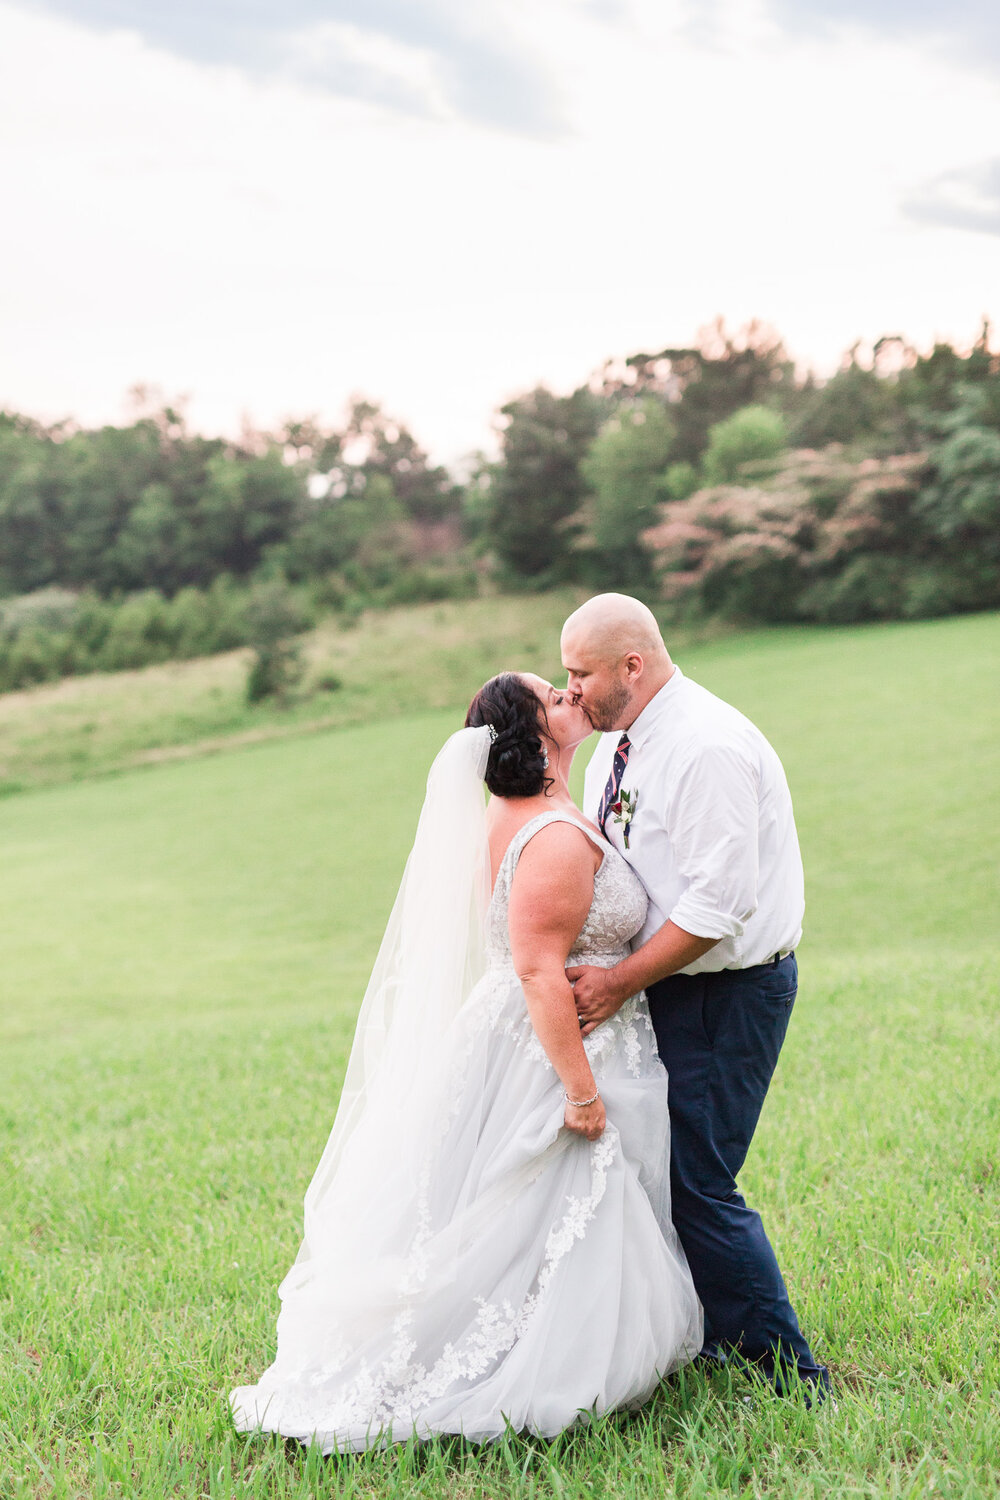 Classy summer wedding at The Trivium Estate in Forest, Virginia || Lynchburg, VA Wedding Photographer || Southern and Central Virginia Estate Wedding